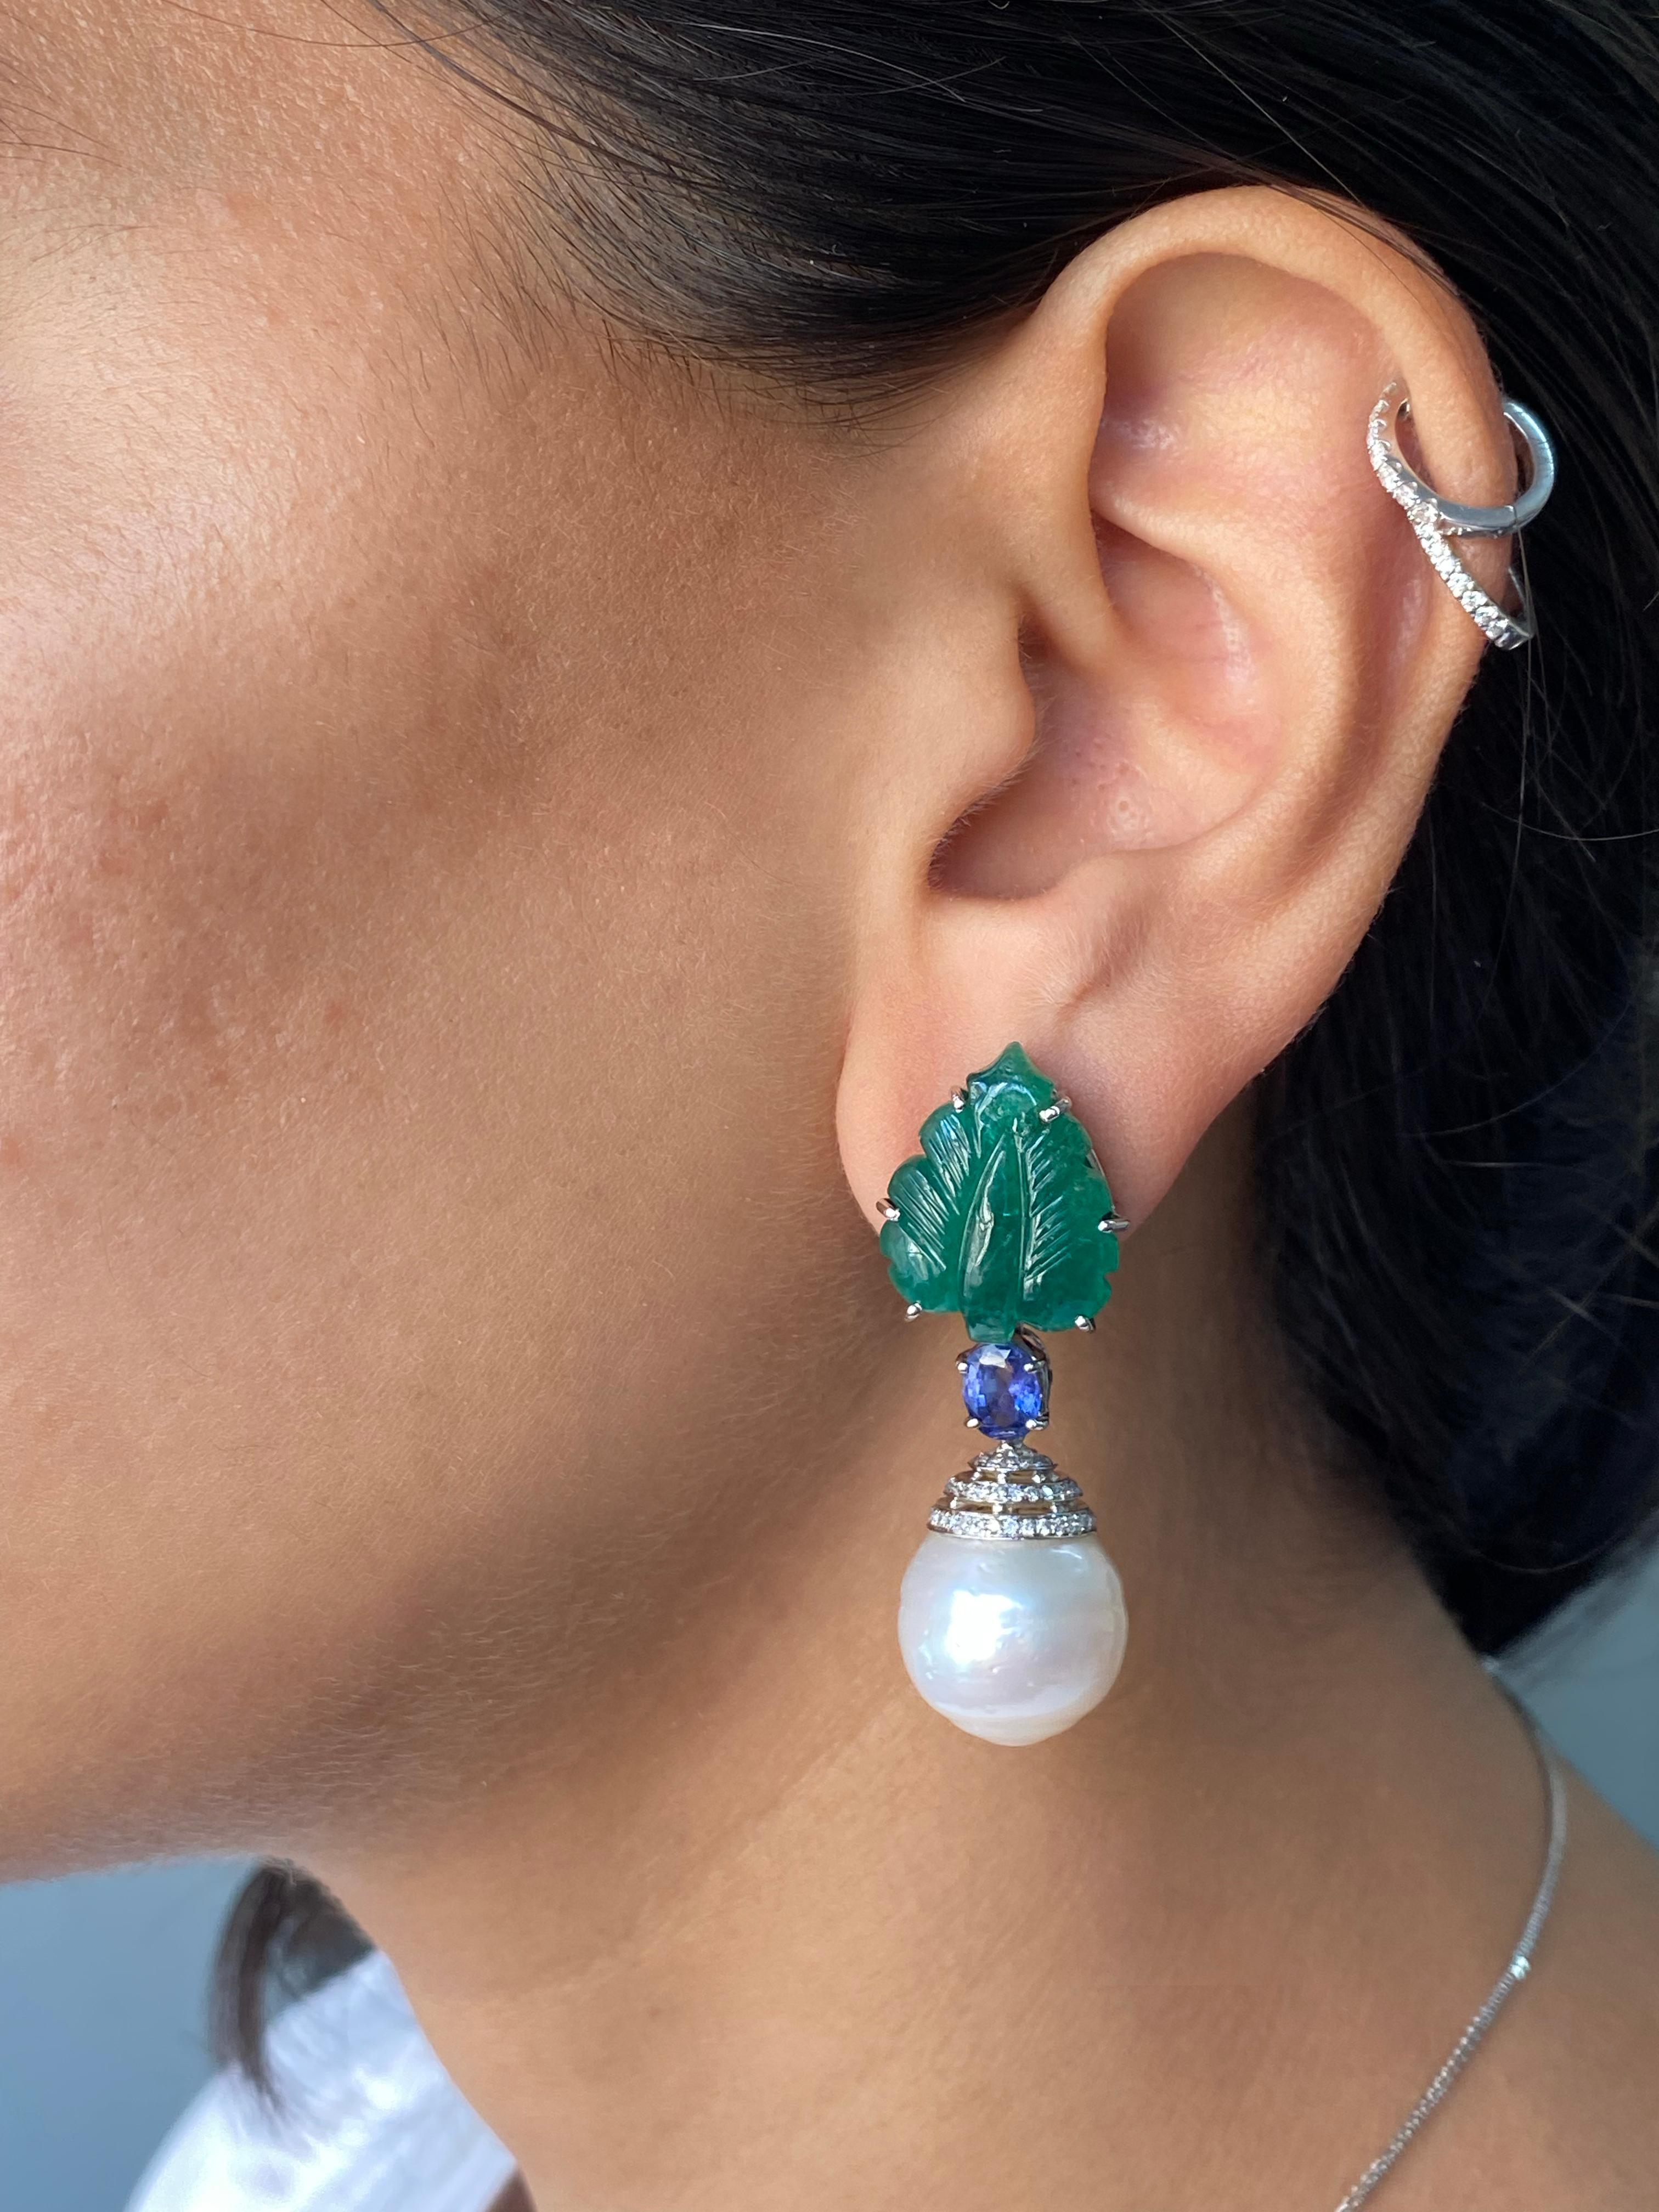 These are a pair of natural 17 carats, hand-carved, Zambian Emeralds with pair of South Sea Pearls and 1.6 carat Blue Sapphires hanging down to complete the look - all set in solid 18K White Gold. 

We offer free express shipping worldwide and